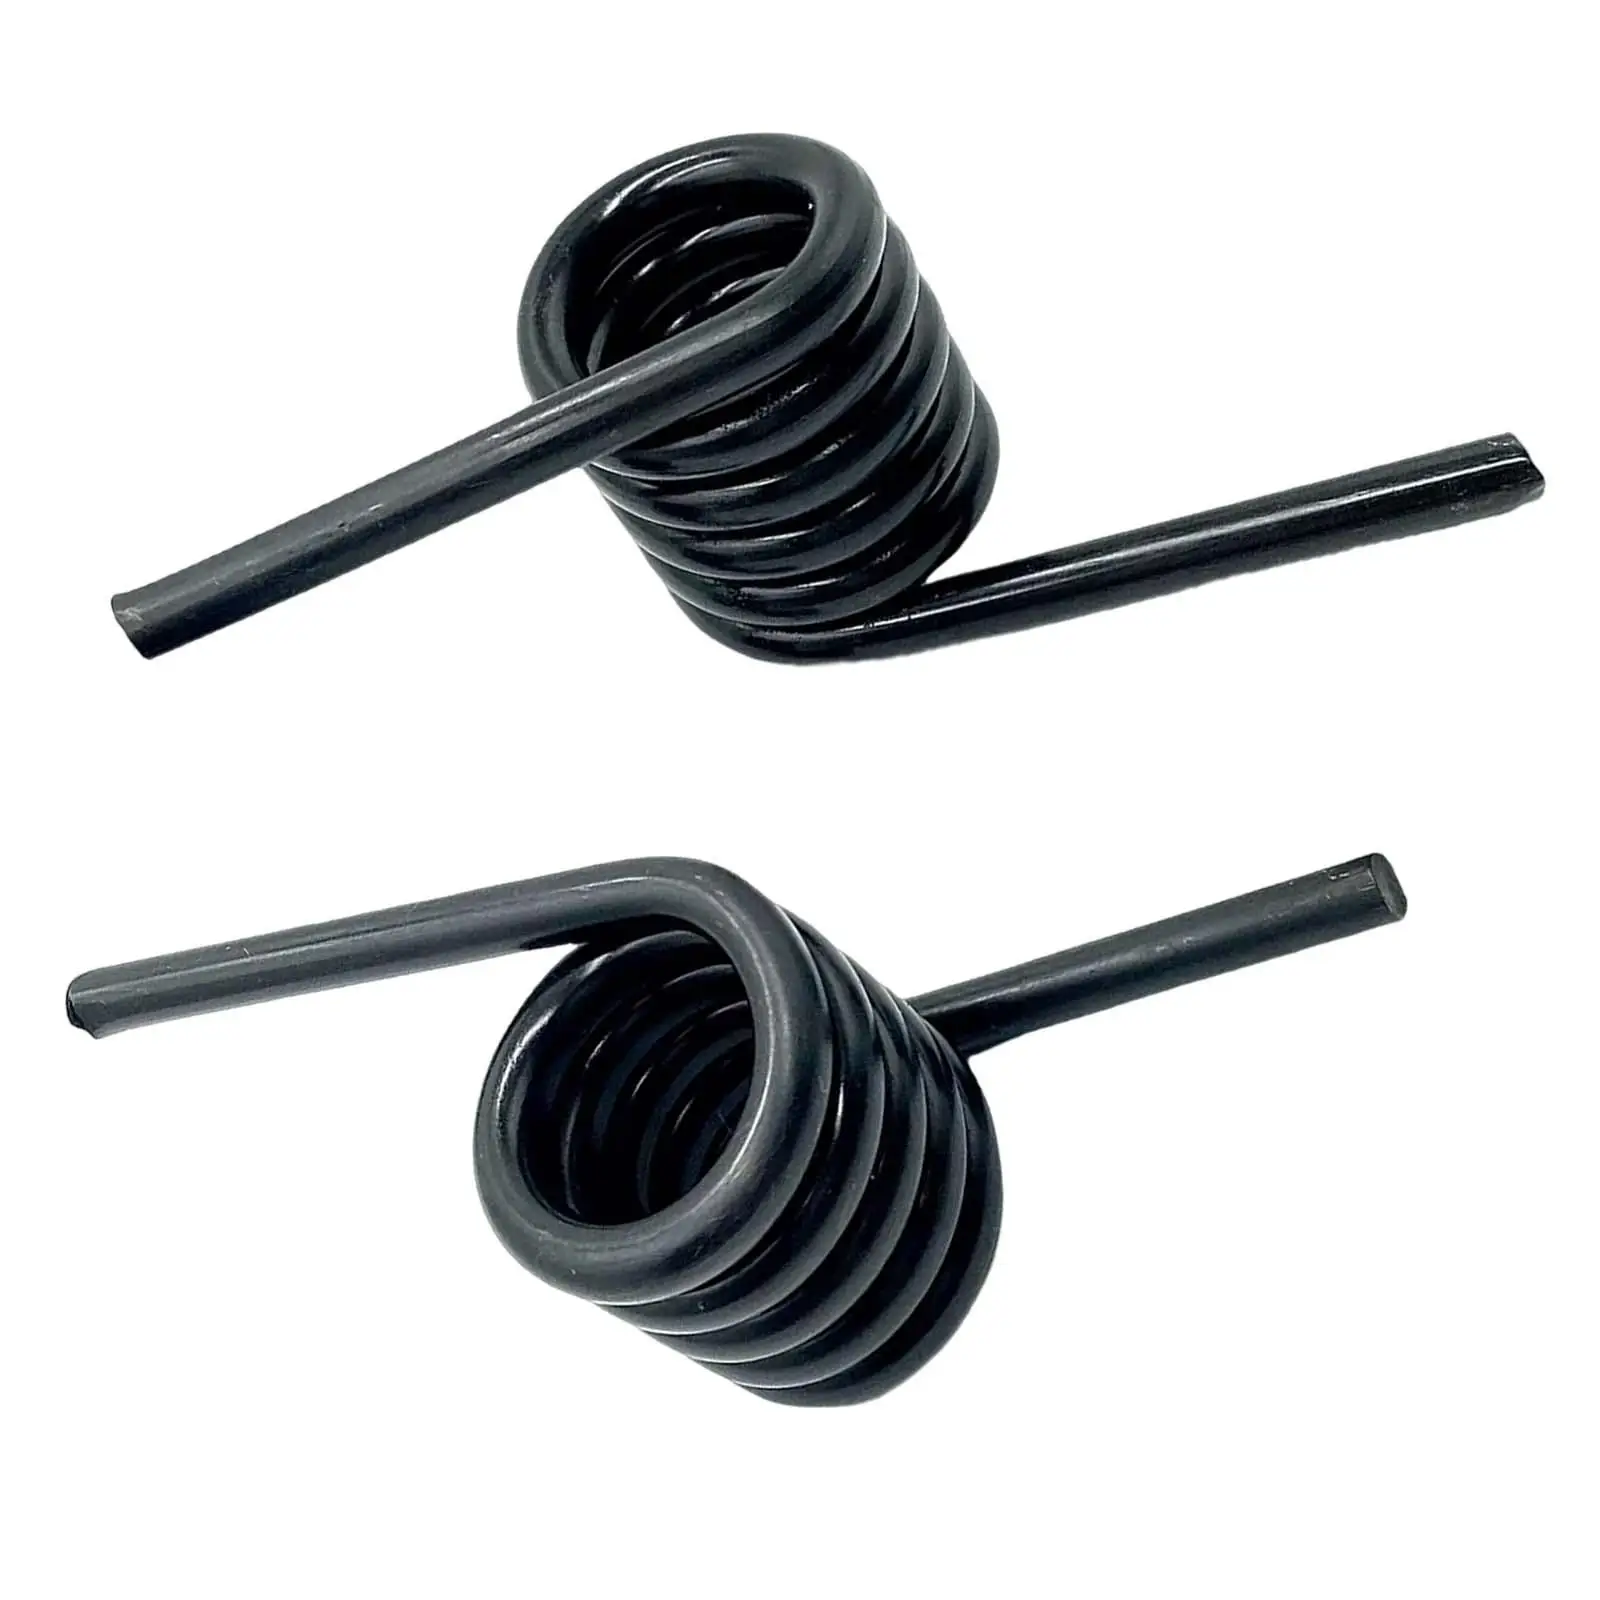 2 Pieces Torsion Ramp Spring 3034278 Left and Right Hand High Strength Fits for Trailer Ramps Direct Replaces